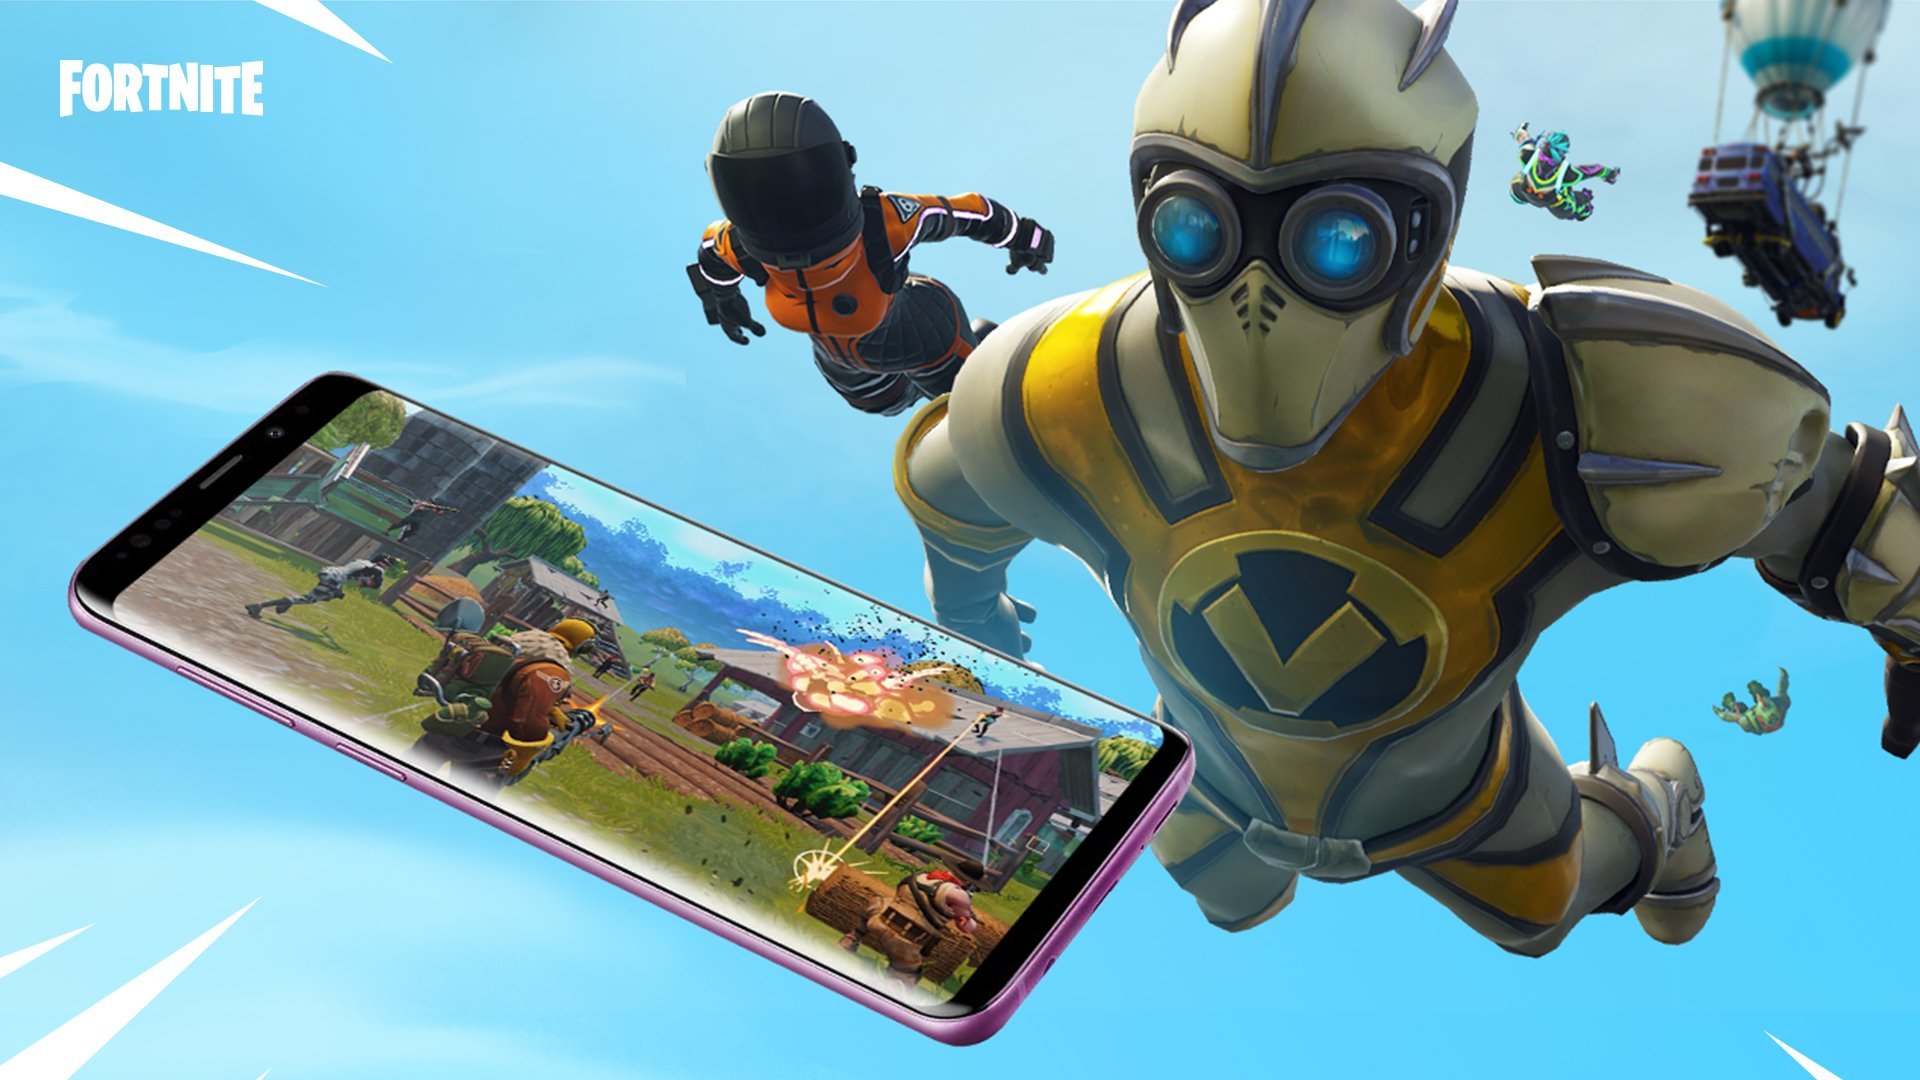 if you do play fortnite we have a dedicated channel in our discord make sure to join our discord channel here to squad up and get some victory royales - fortnite ipad air 2 fps